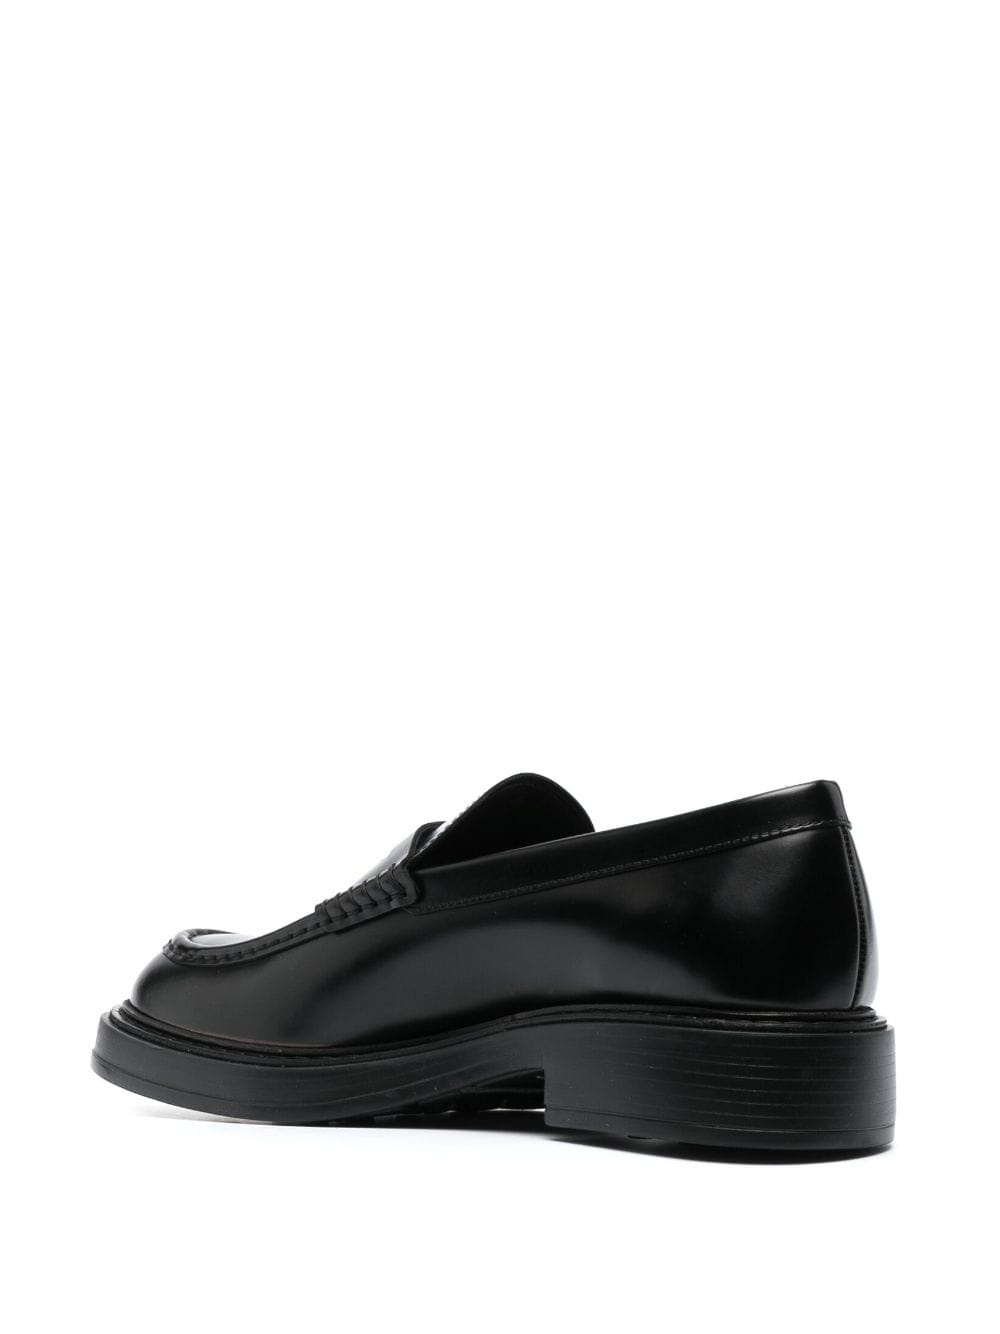 leather 50mm penny loafers - 3